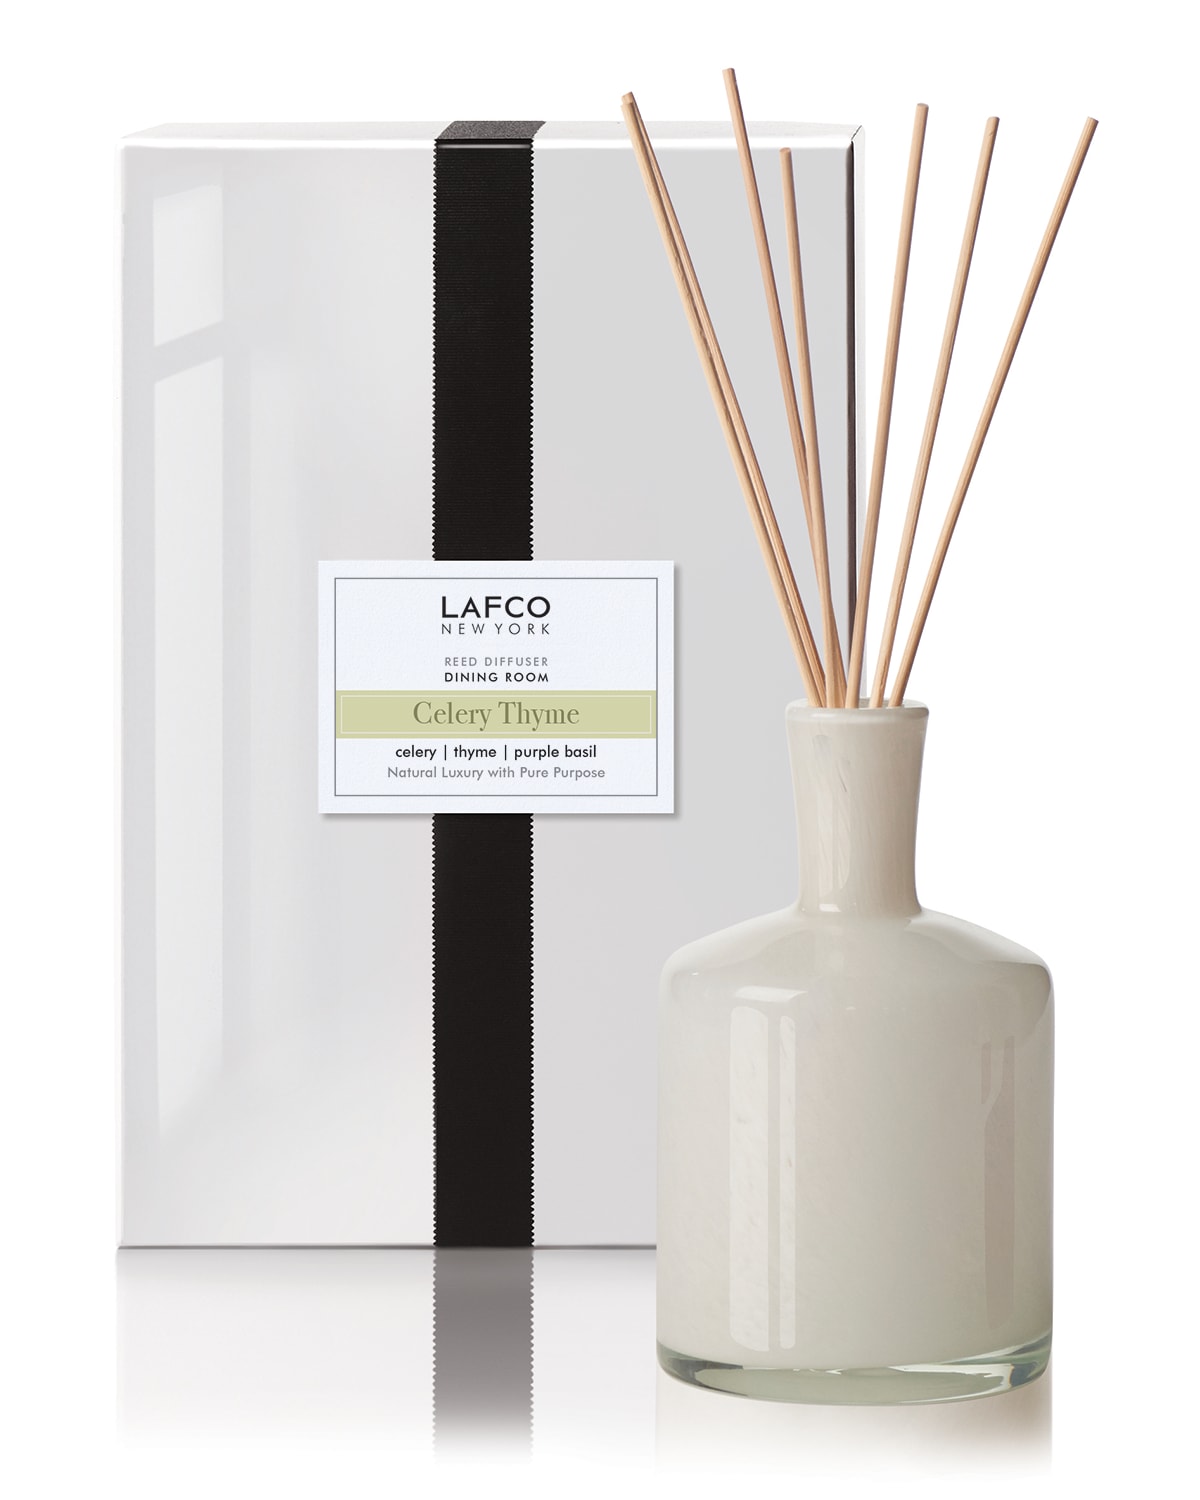 Celery Thyme Reed Diffuser &#150; Dining Room, 15 oz./ 443 mL